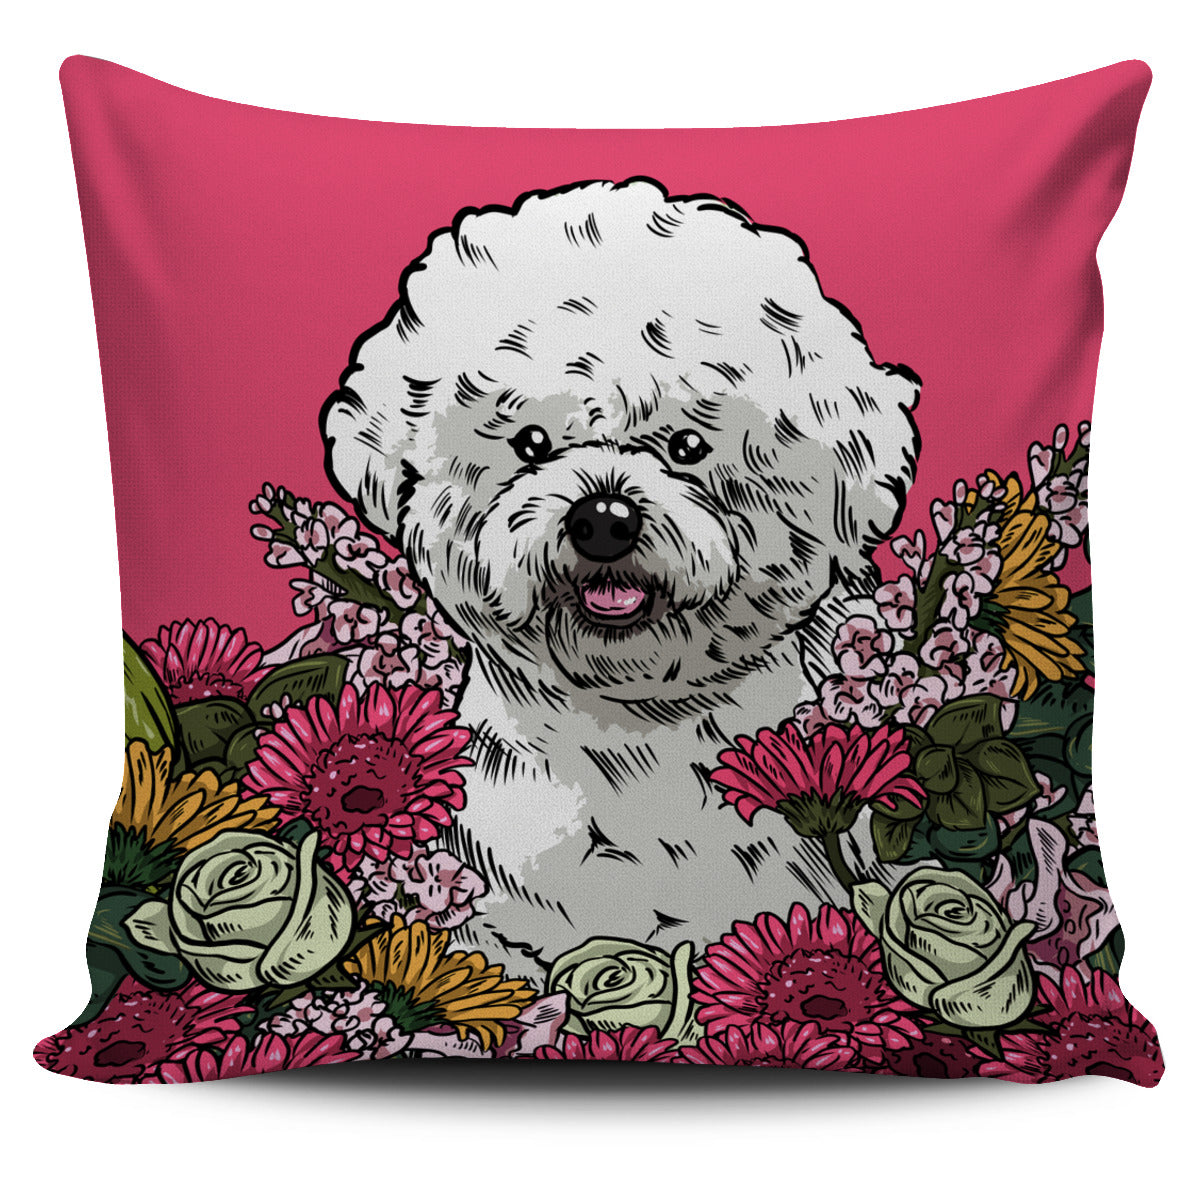 Illustrated Bichon Frise Pillow Cover